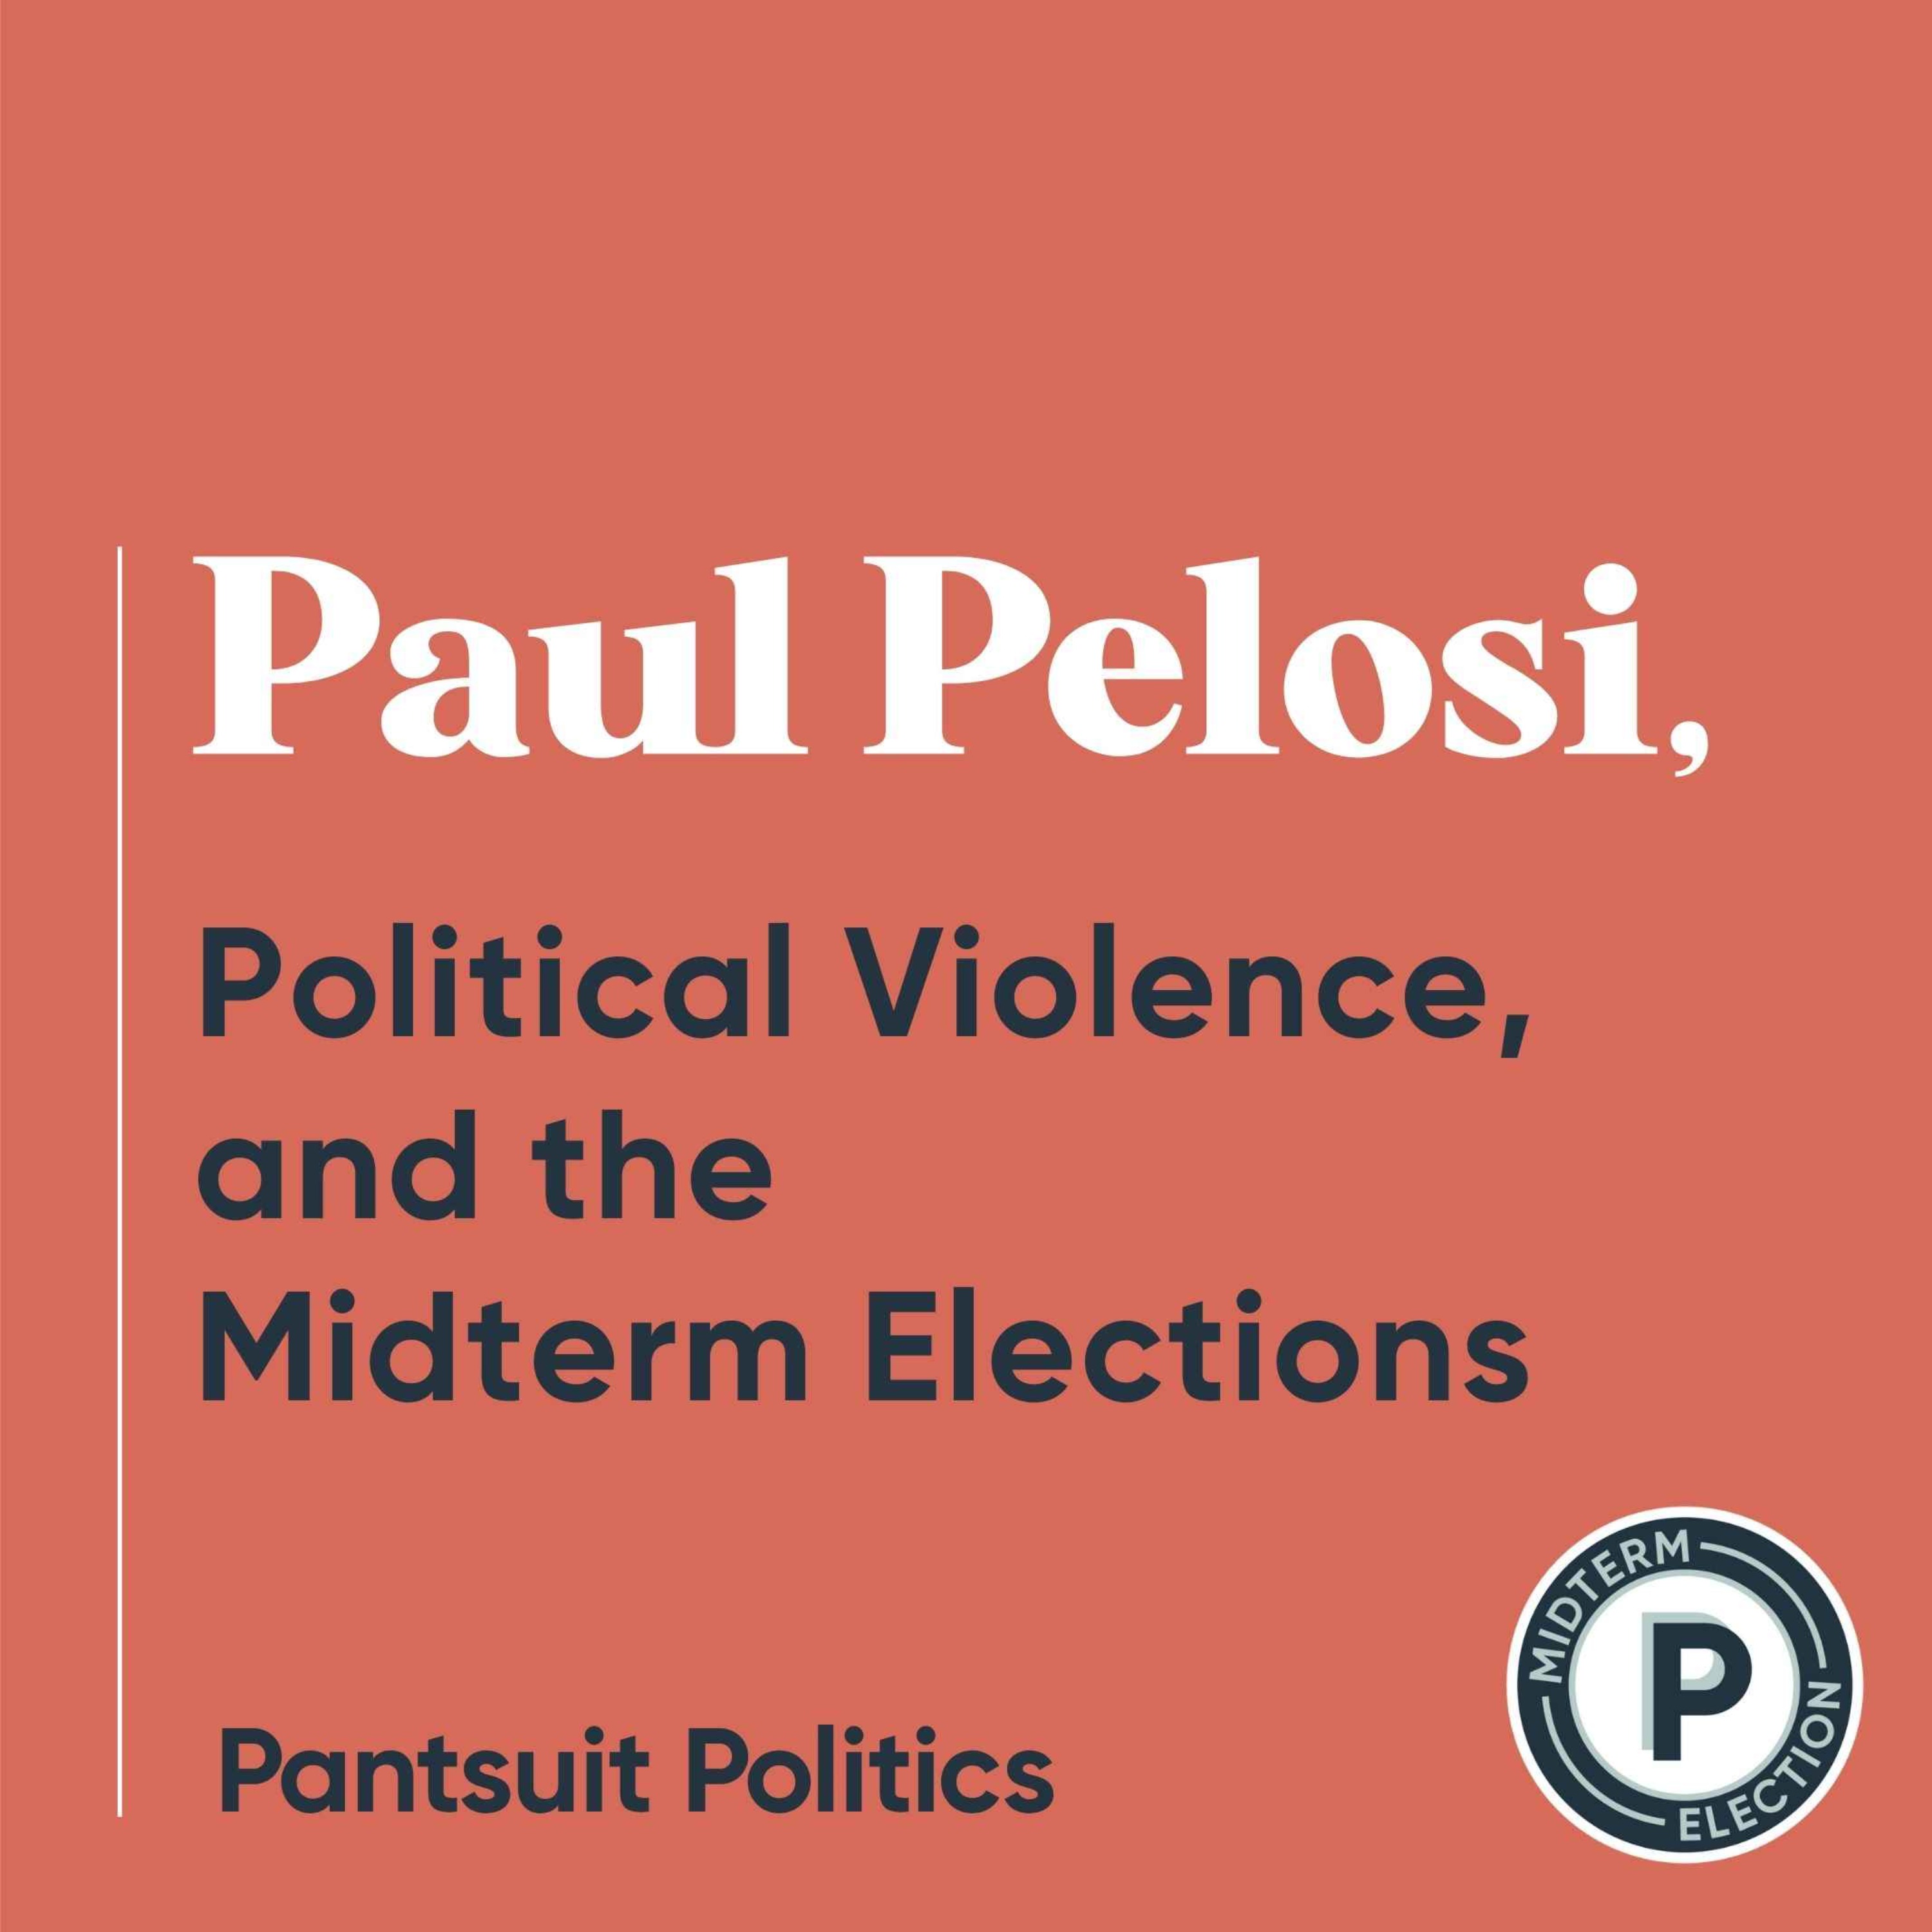 Paul Pelosi, Political Violence, and the Midterm Elections